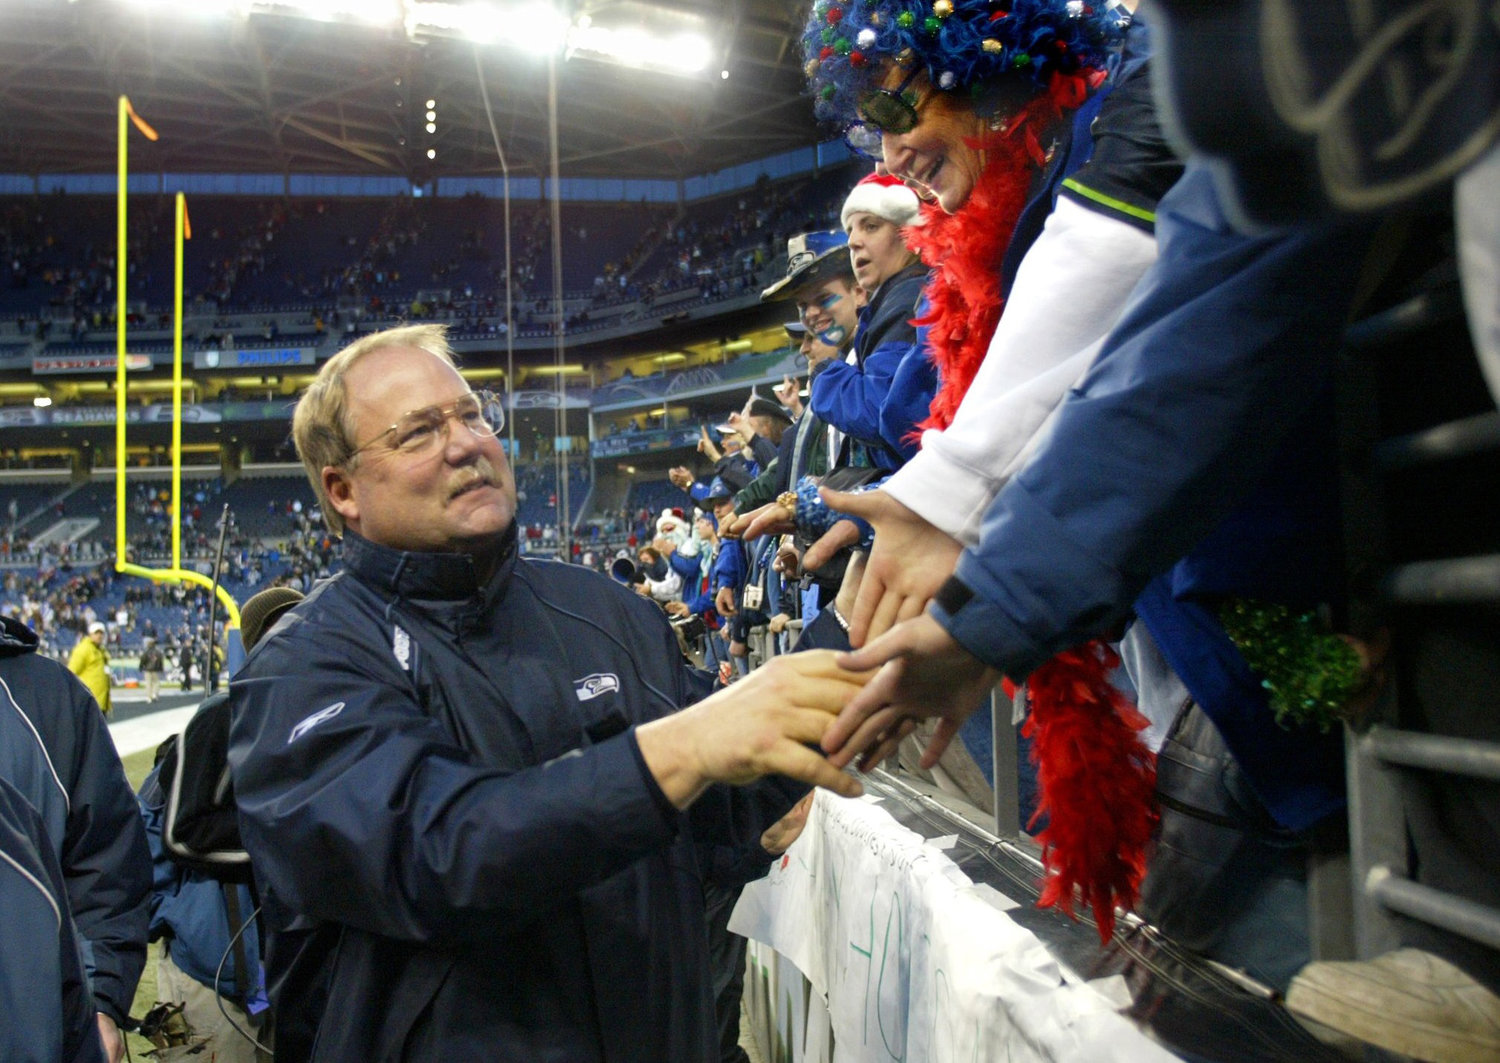 Seattle Seahawks coach Mike Holmgren takes time to congratulate the fans following a 28-10 win over the Arizona Cardinals at Seahawks Stadium in Seattle on December 21, 2003..